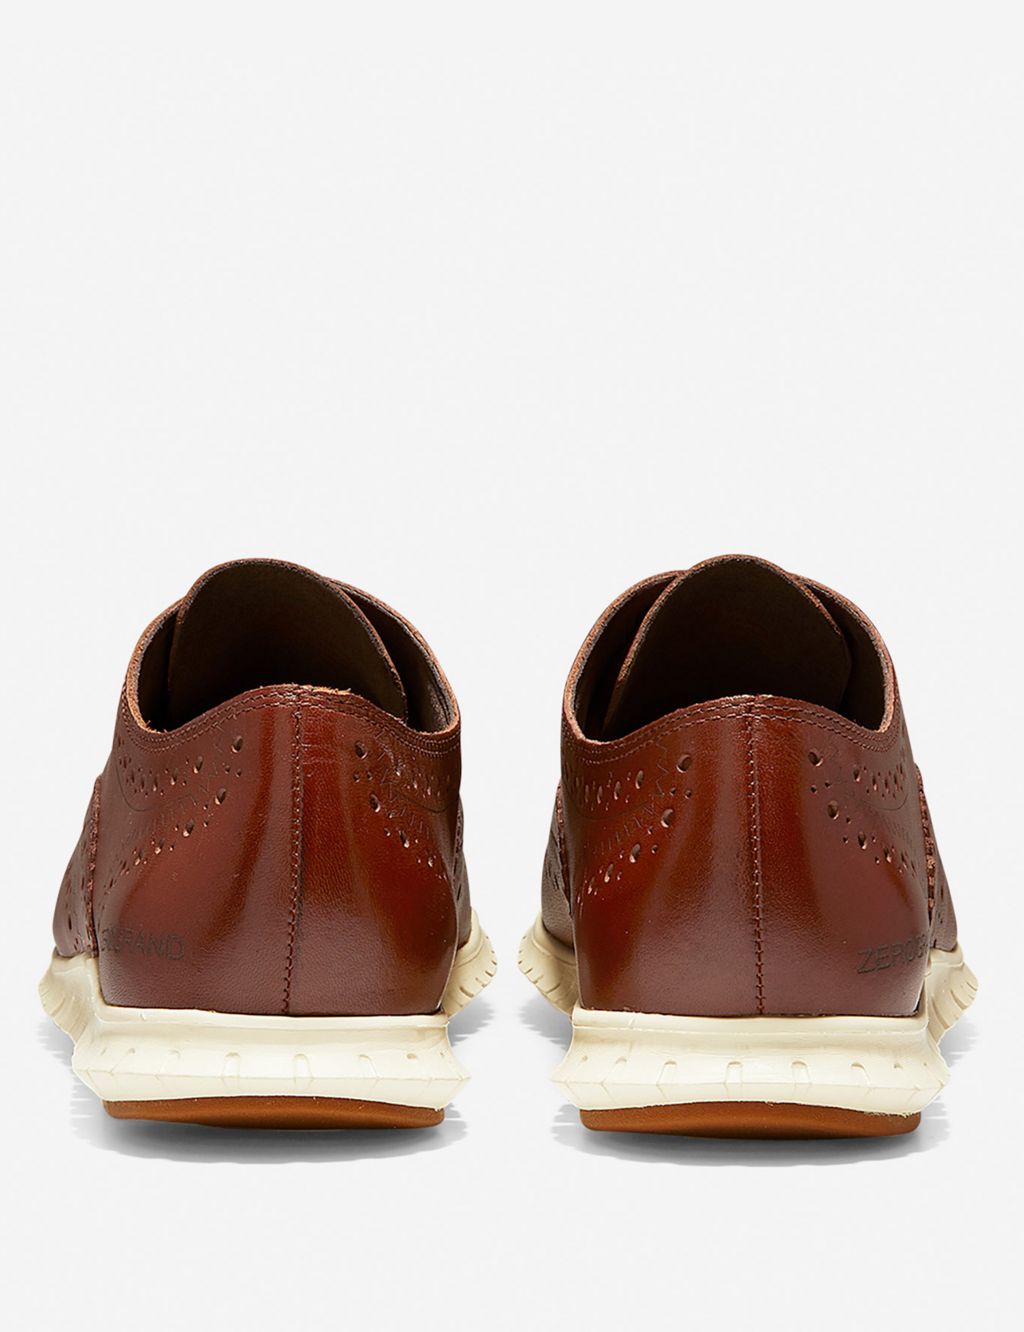 Zerogrand Leather Oxford Shoes image 3